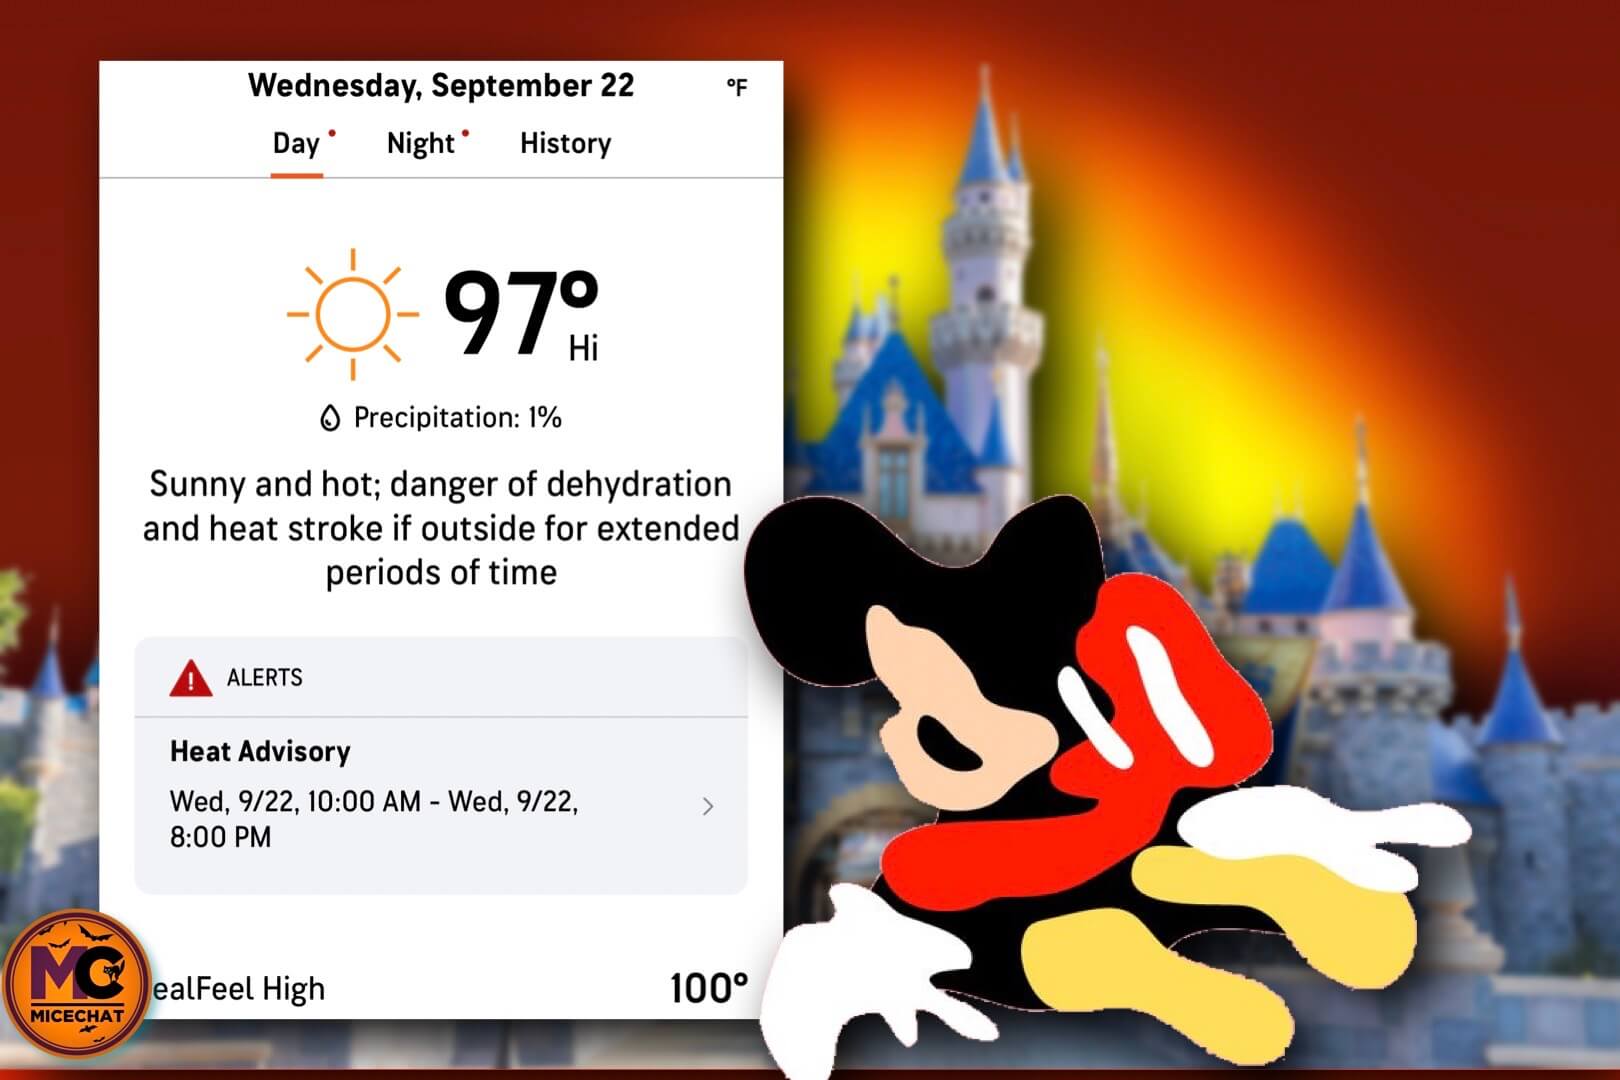 So this means I have a reservation, right? : r/Disneyland